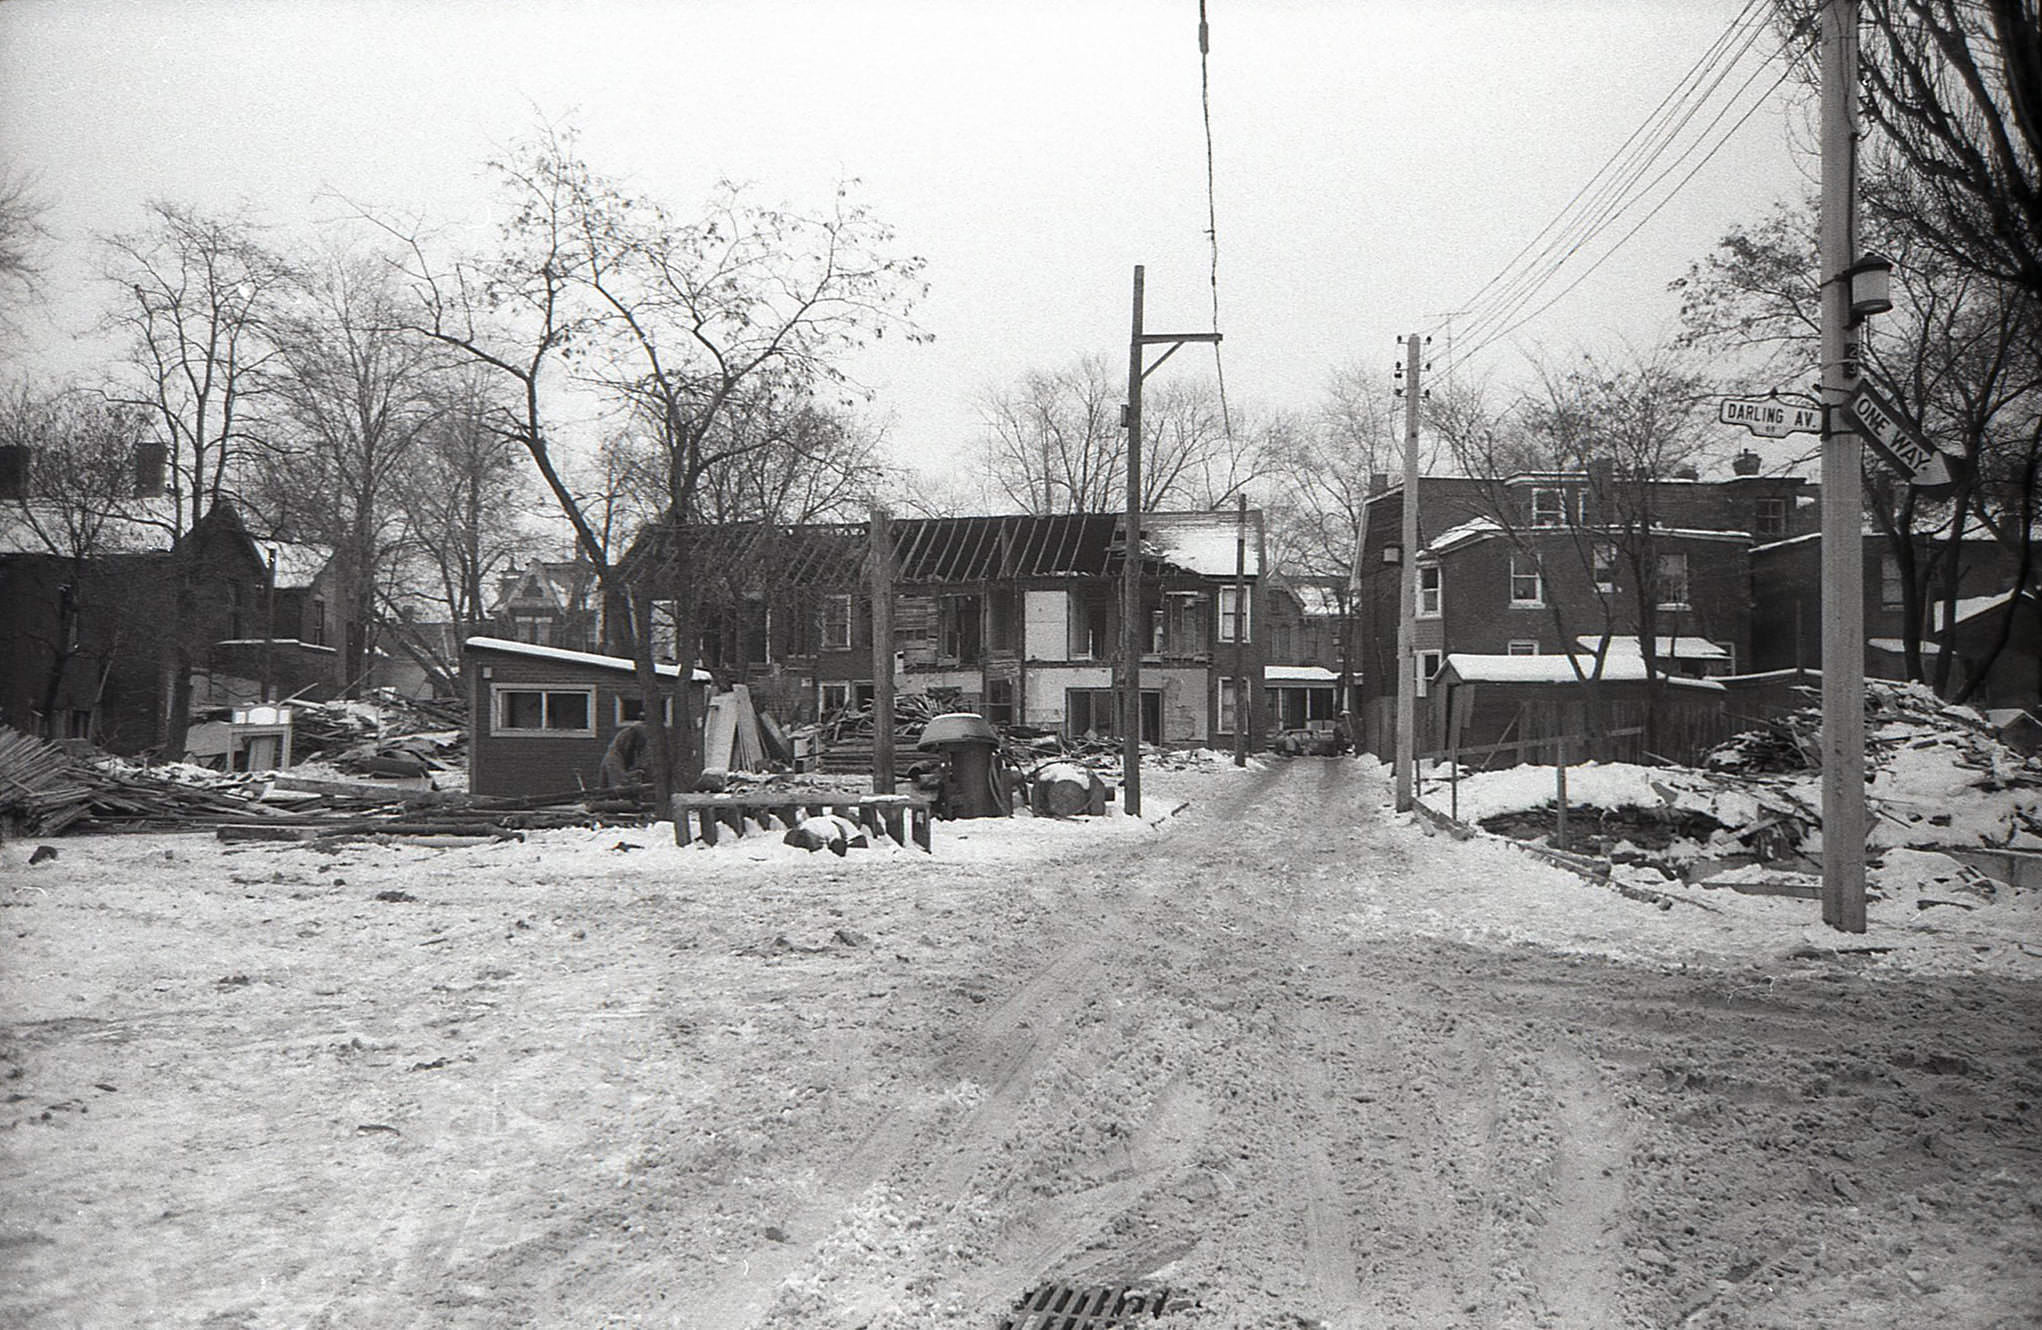 1960s: Darling Ave., 1960s.